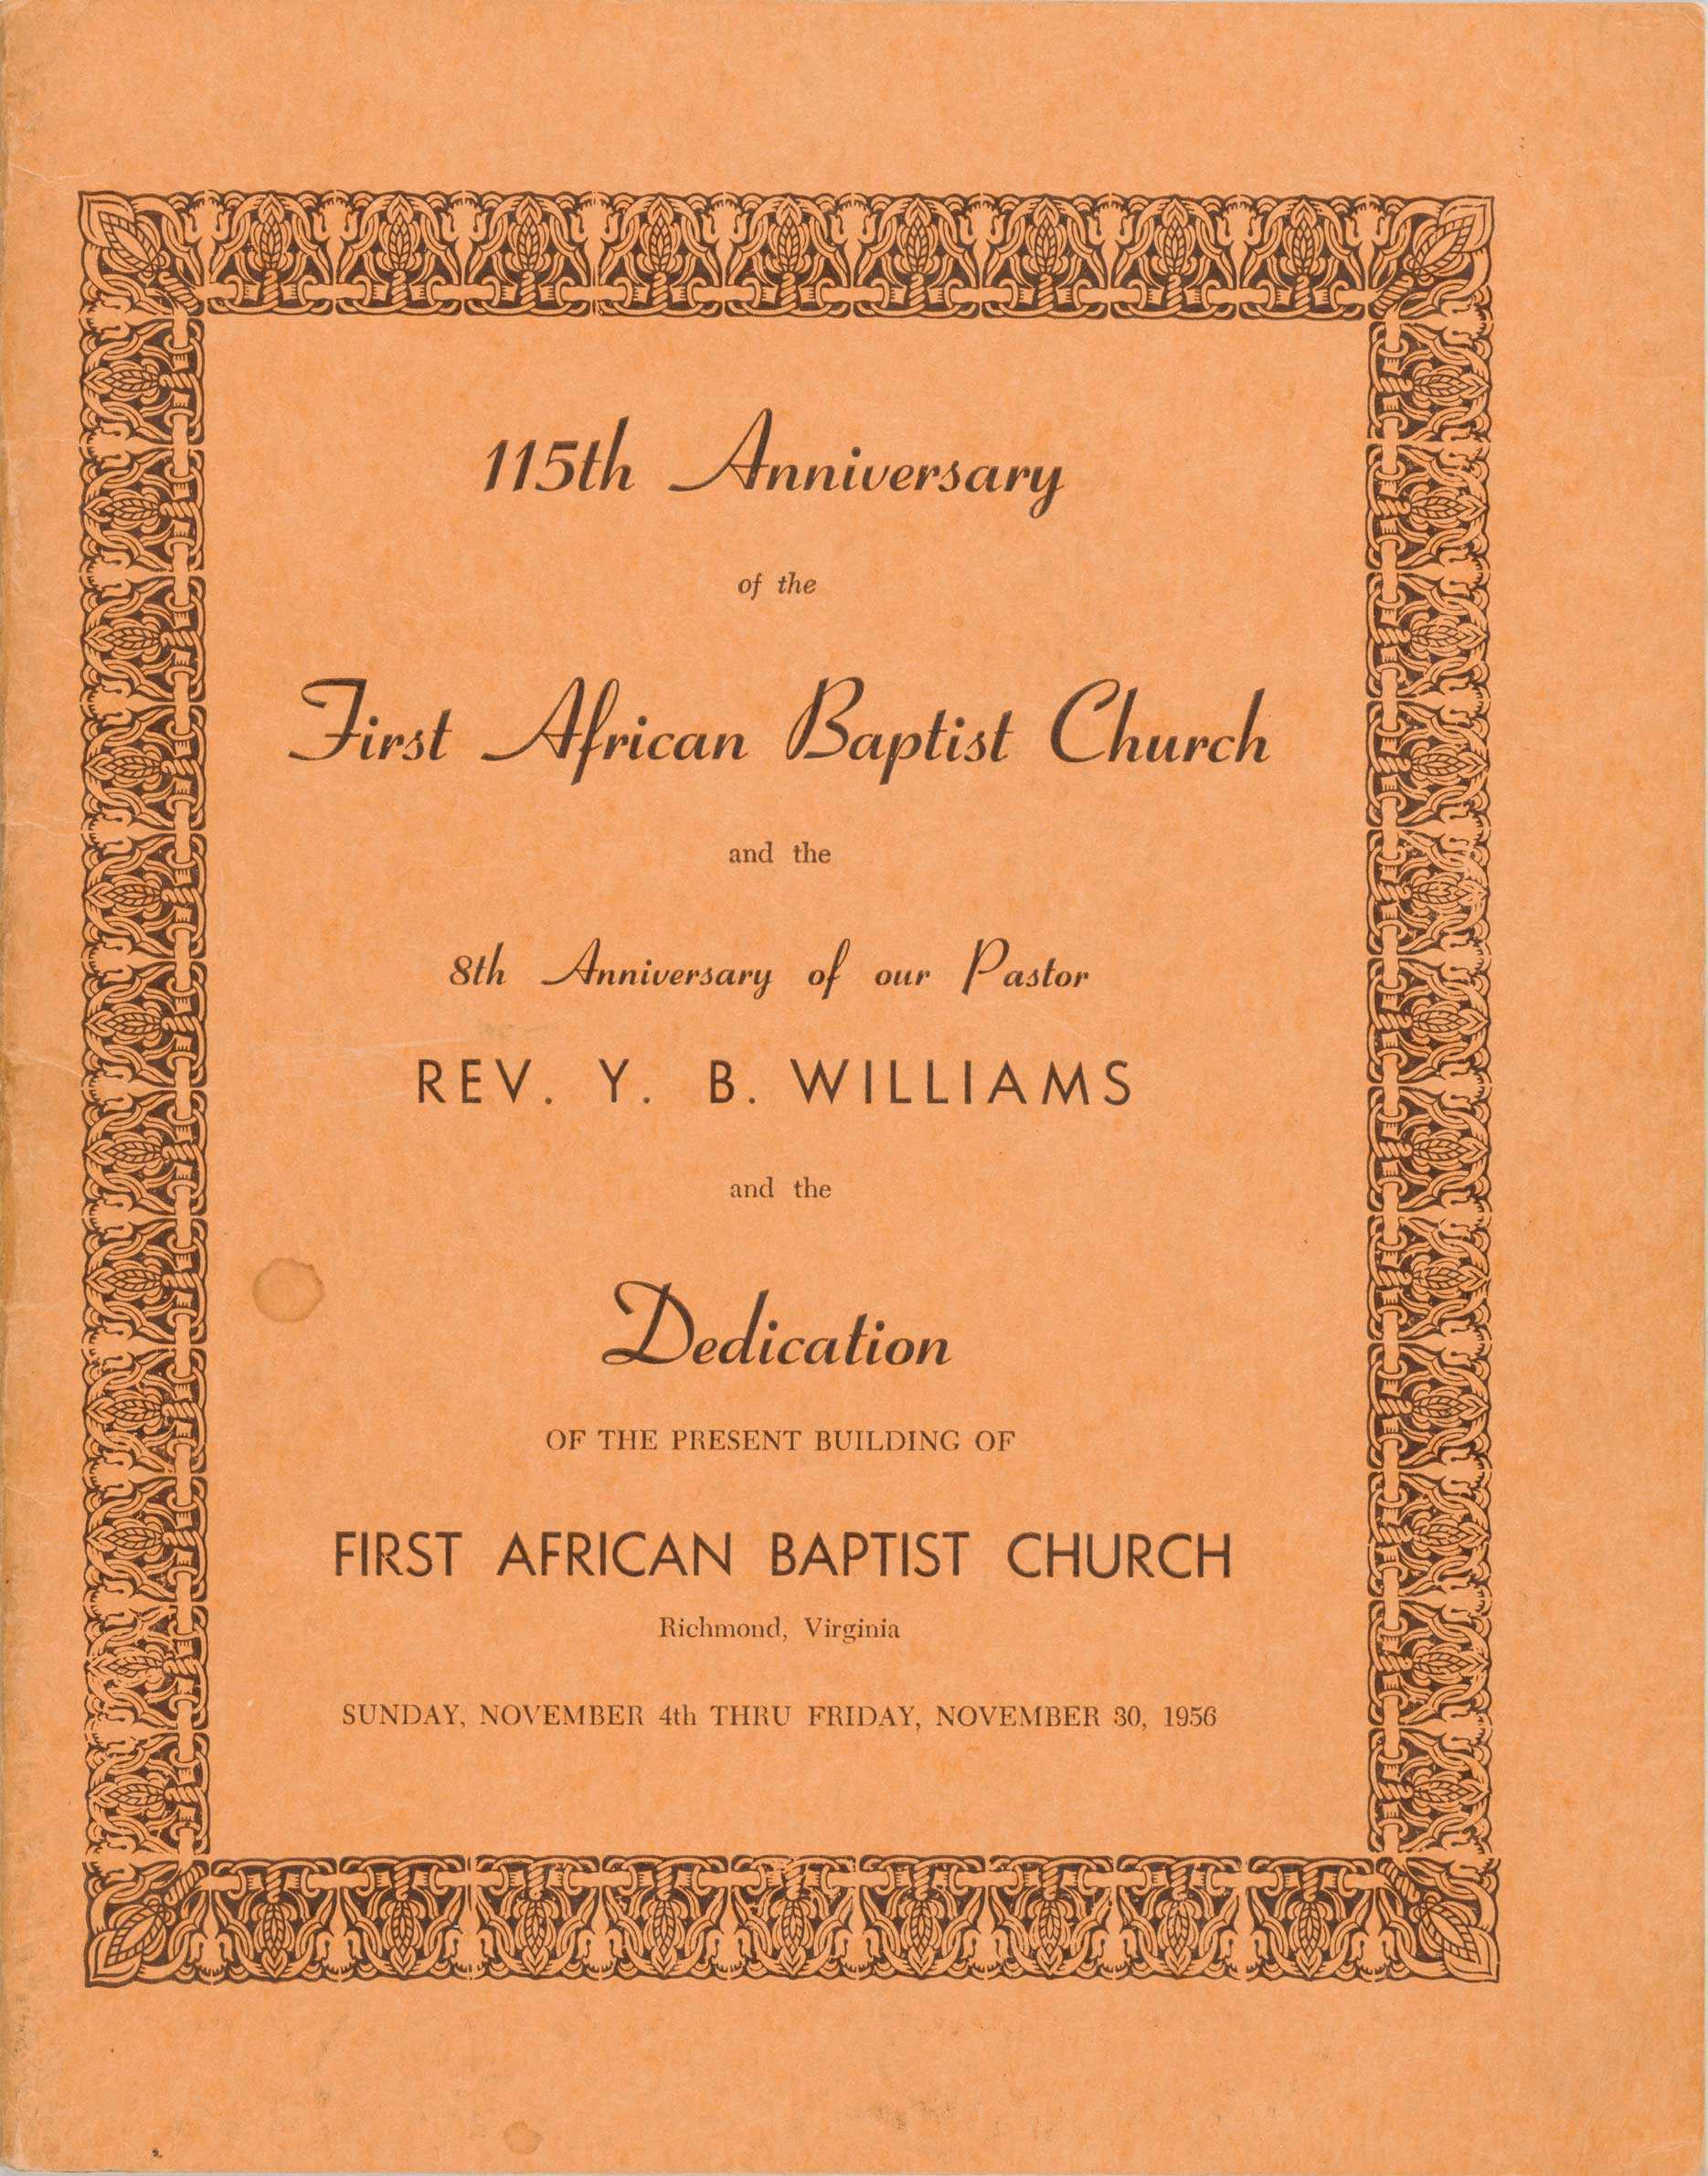 Certificate celebrating 115th anniversary of the First African Baptist Church